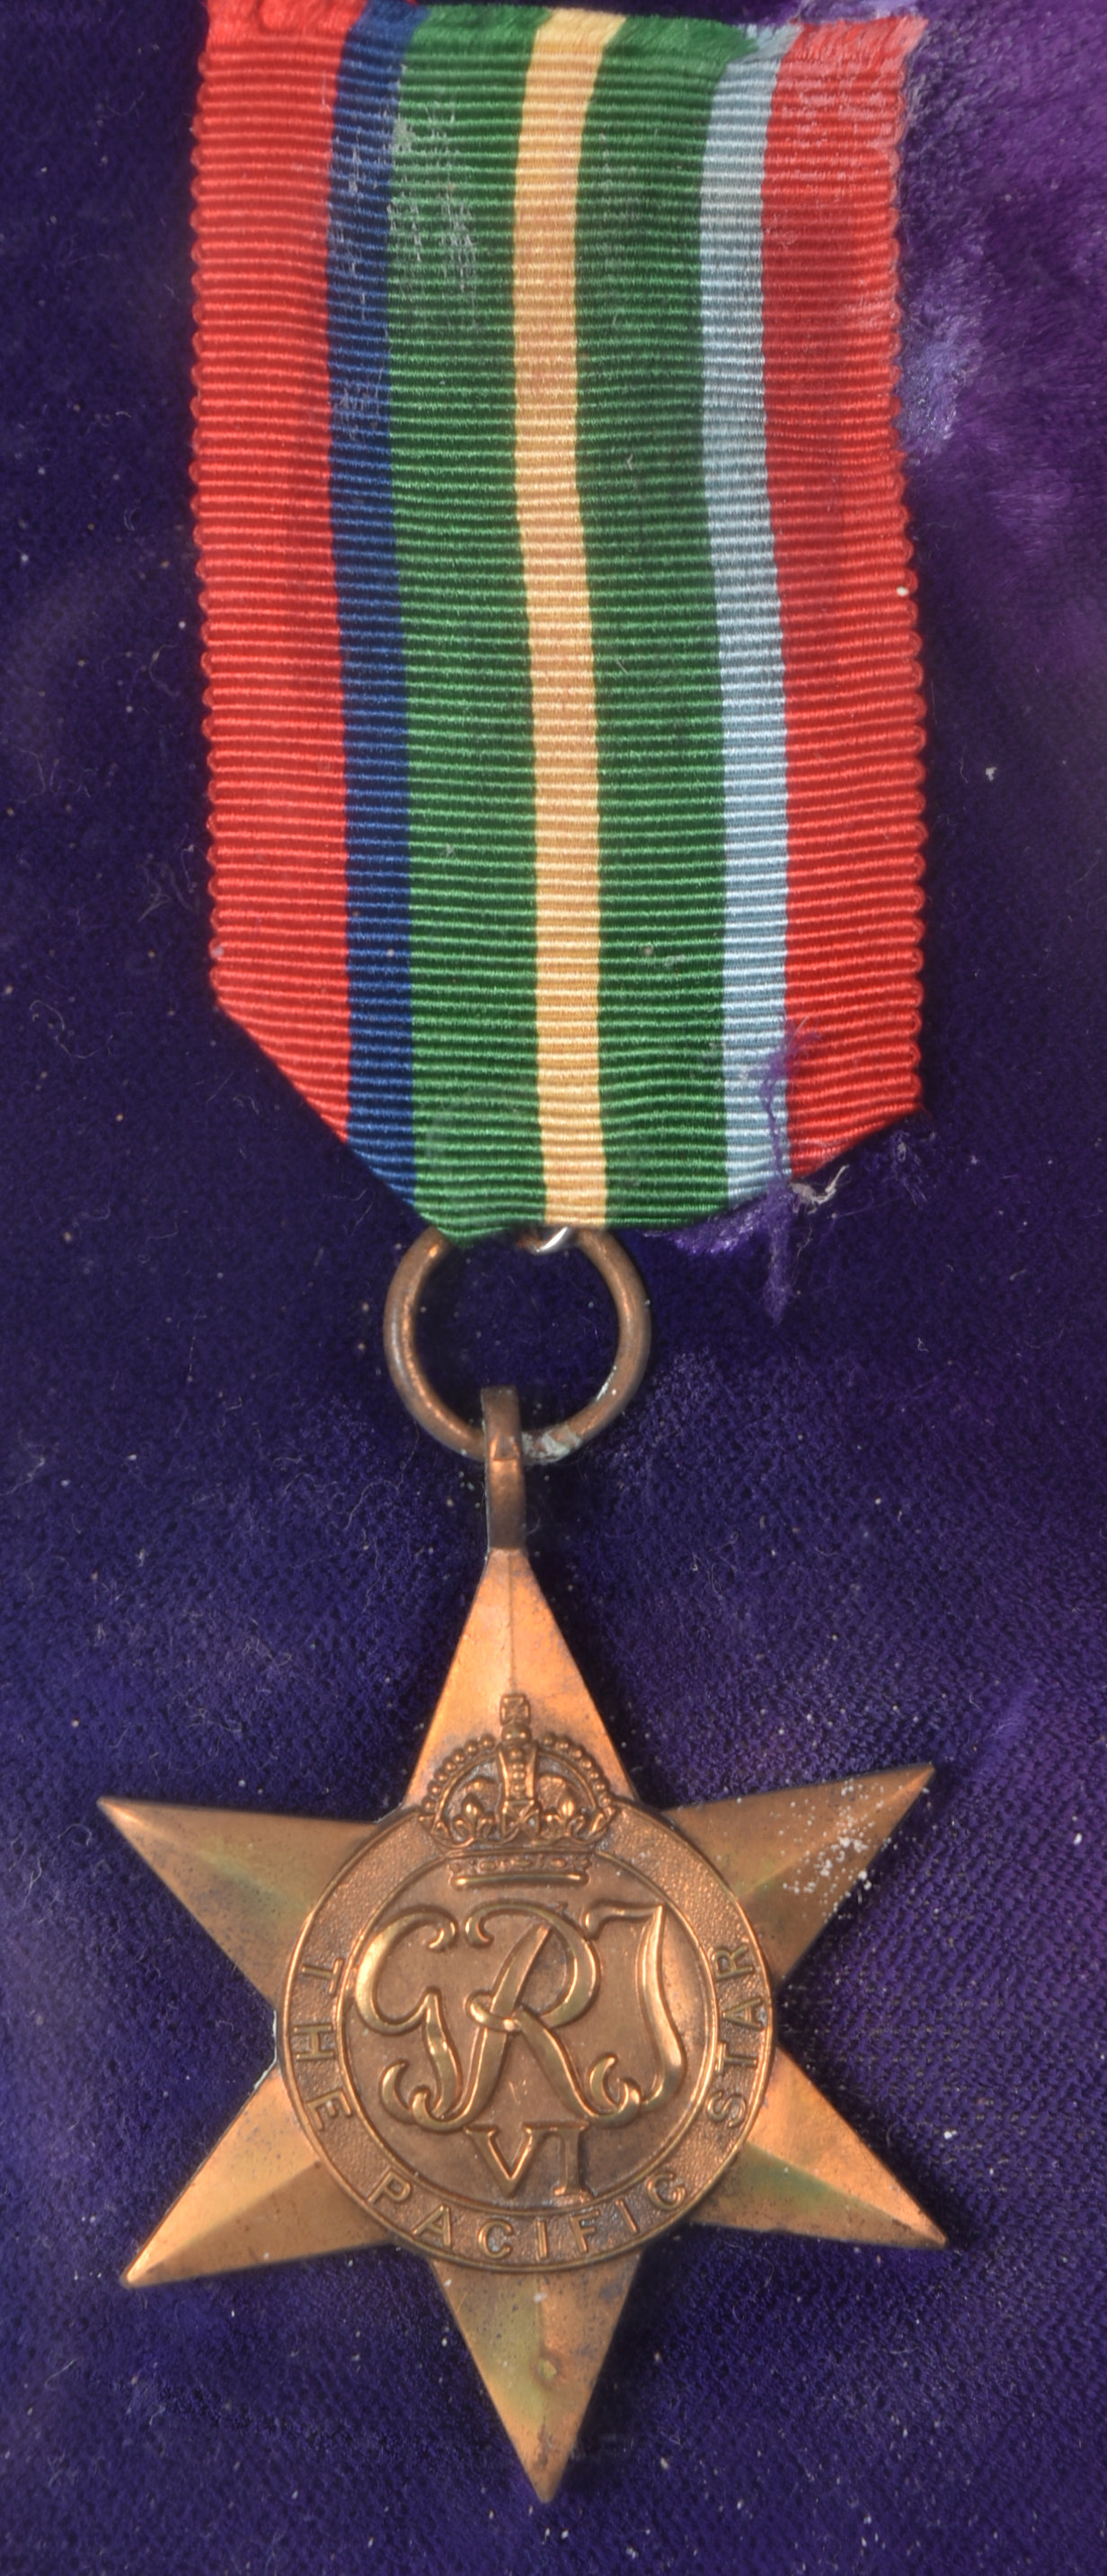 WWII SECOND WORLD WAR MEDAL TRIO - R. KELLY ROYAL NAVY - Image 7 of 8